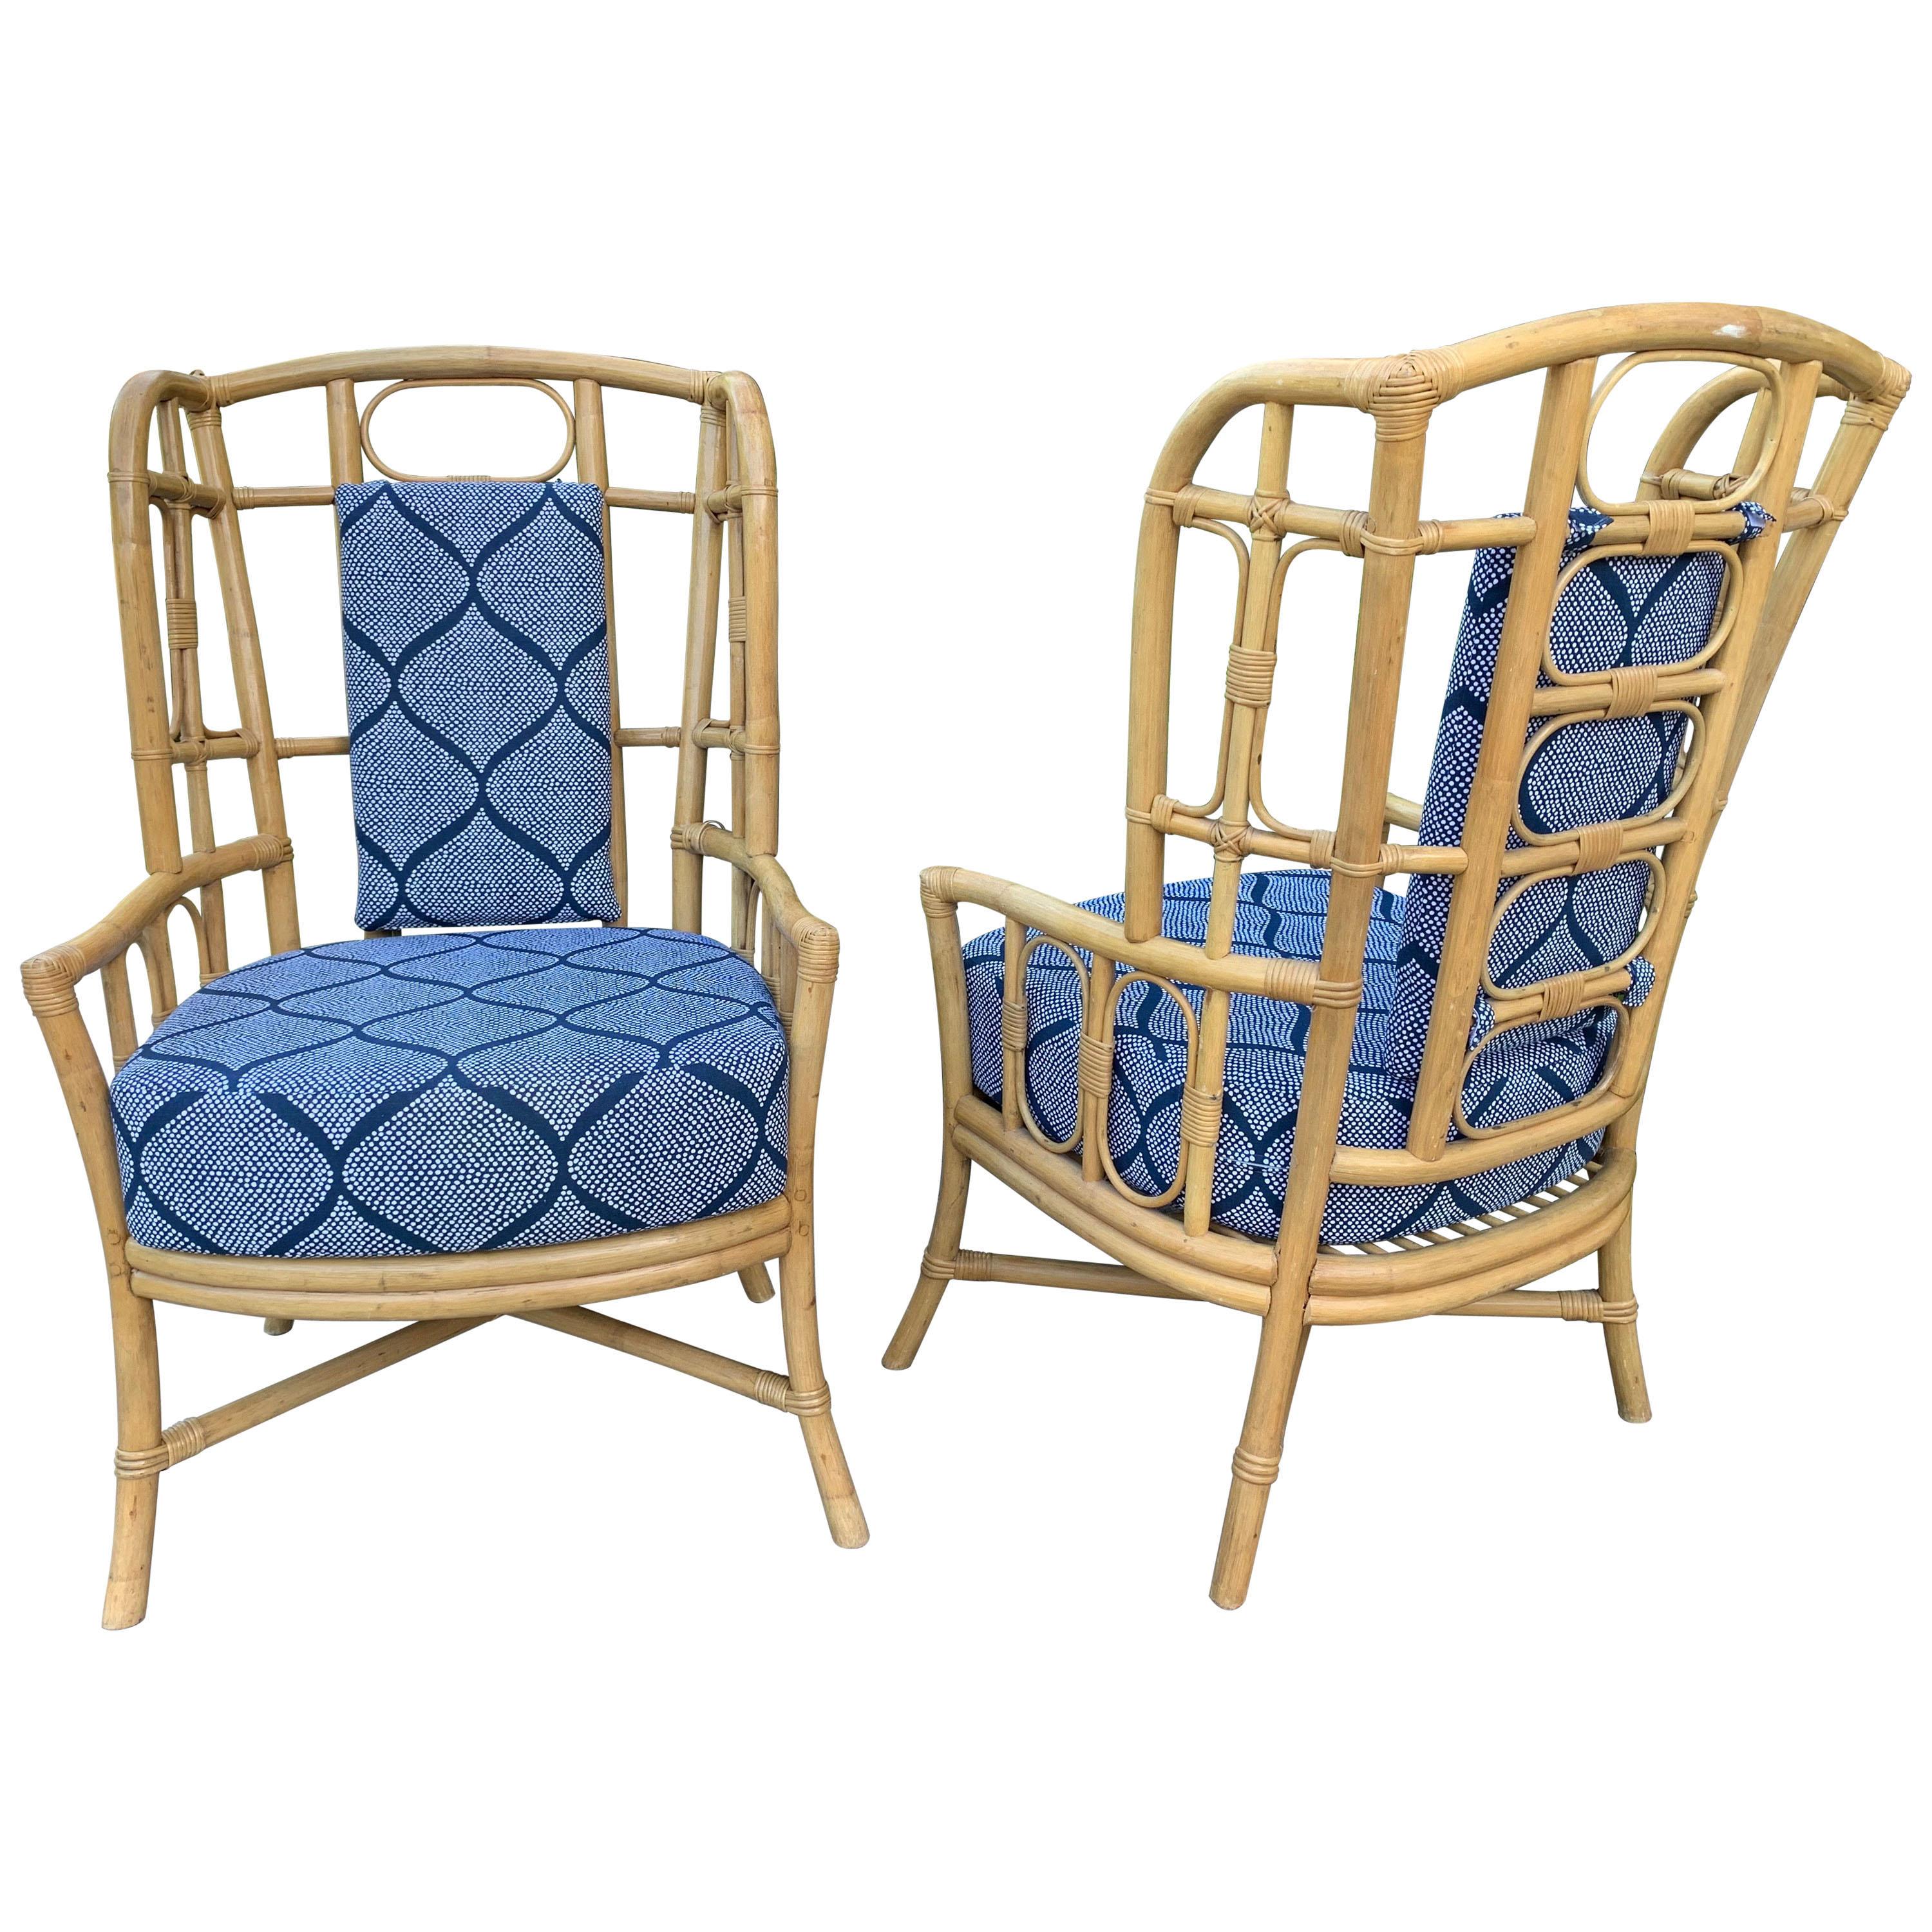 Vintage Boho Chic Bamboo Wingback Armchairs, Pair